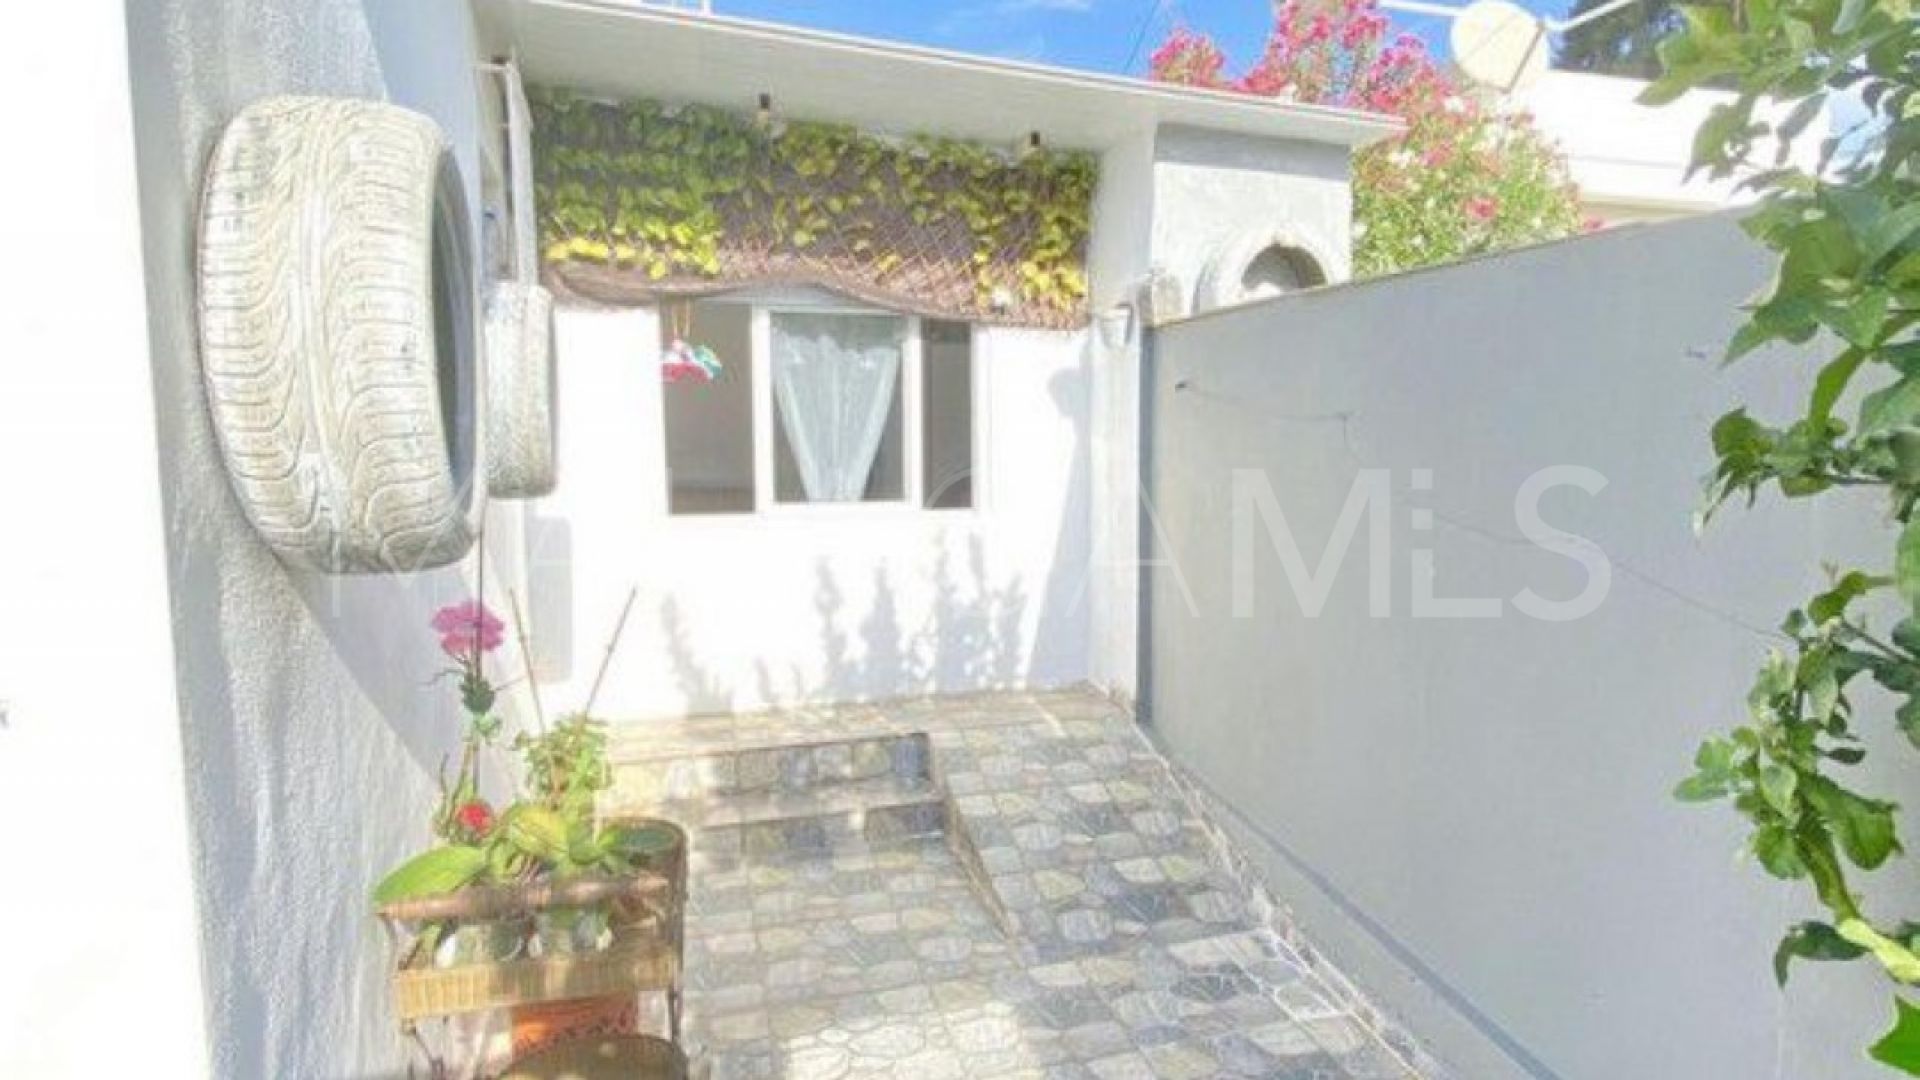 For sale house in Costabella with 3 bedrooms